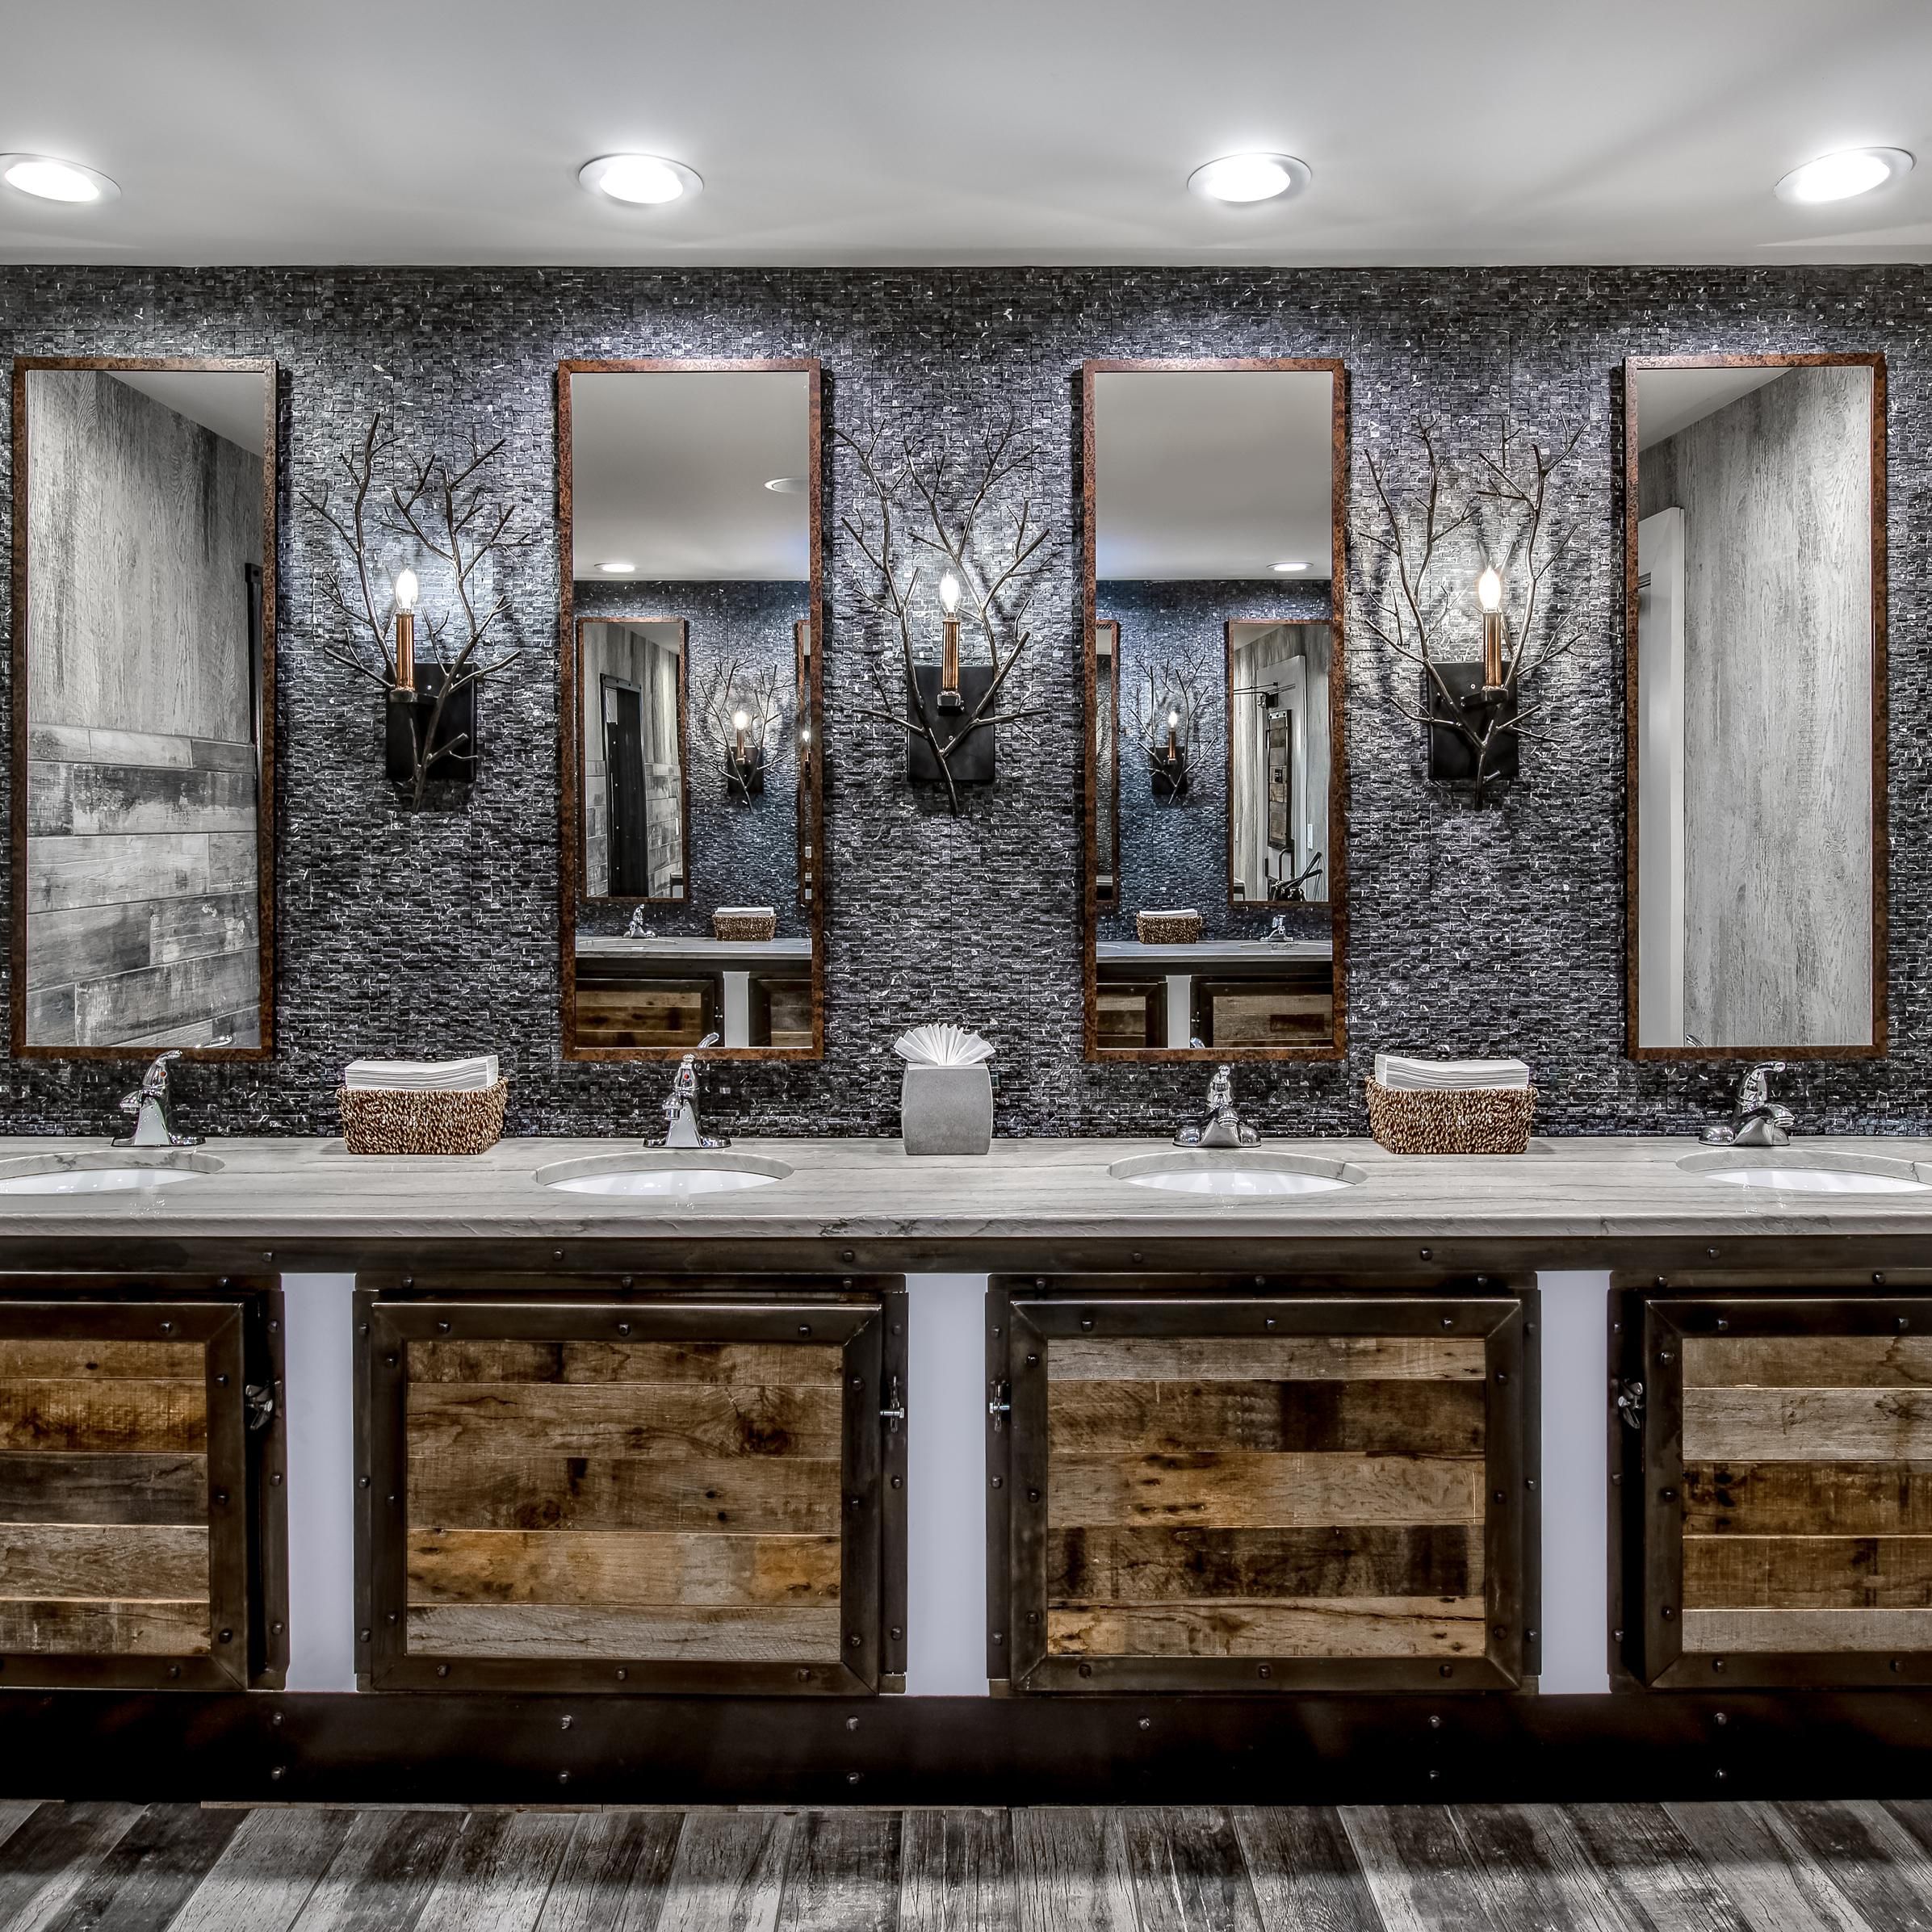 Our bathrooms make quite the statement